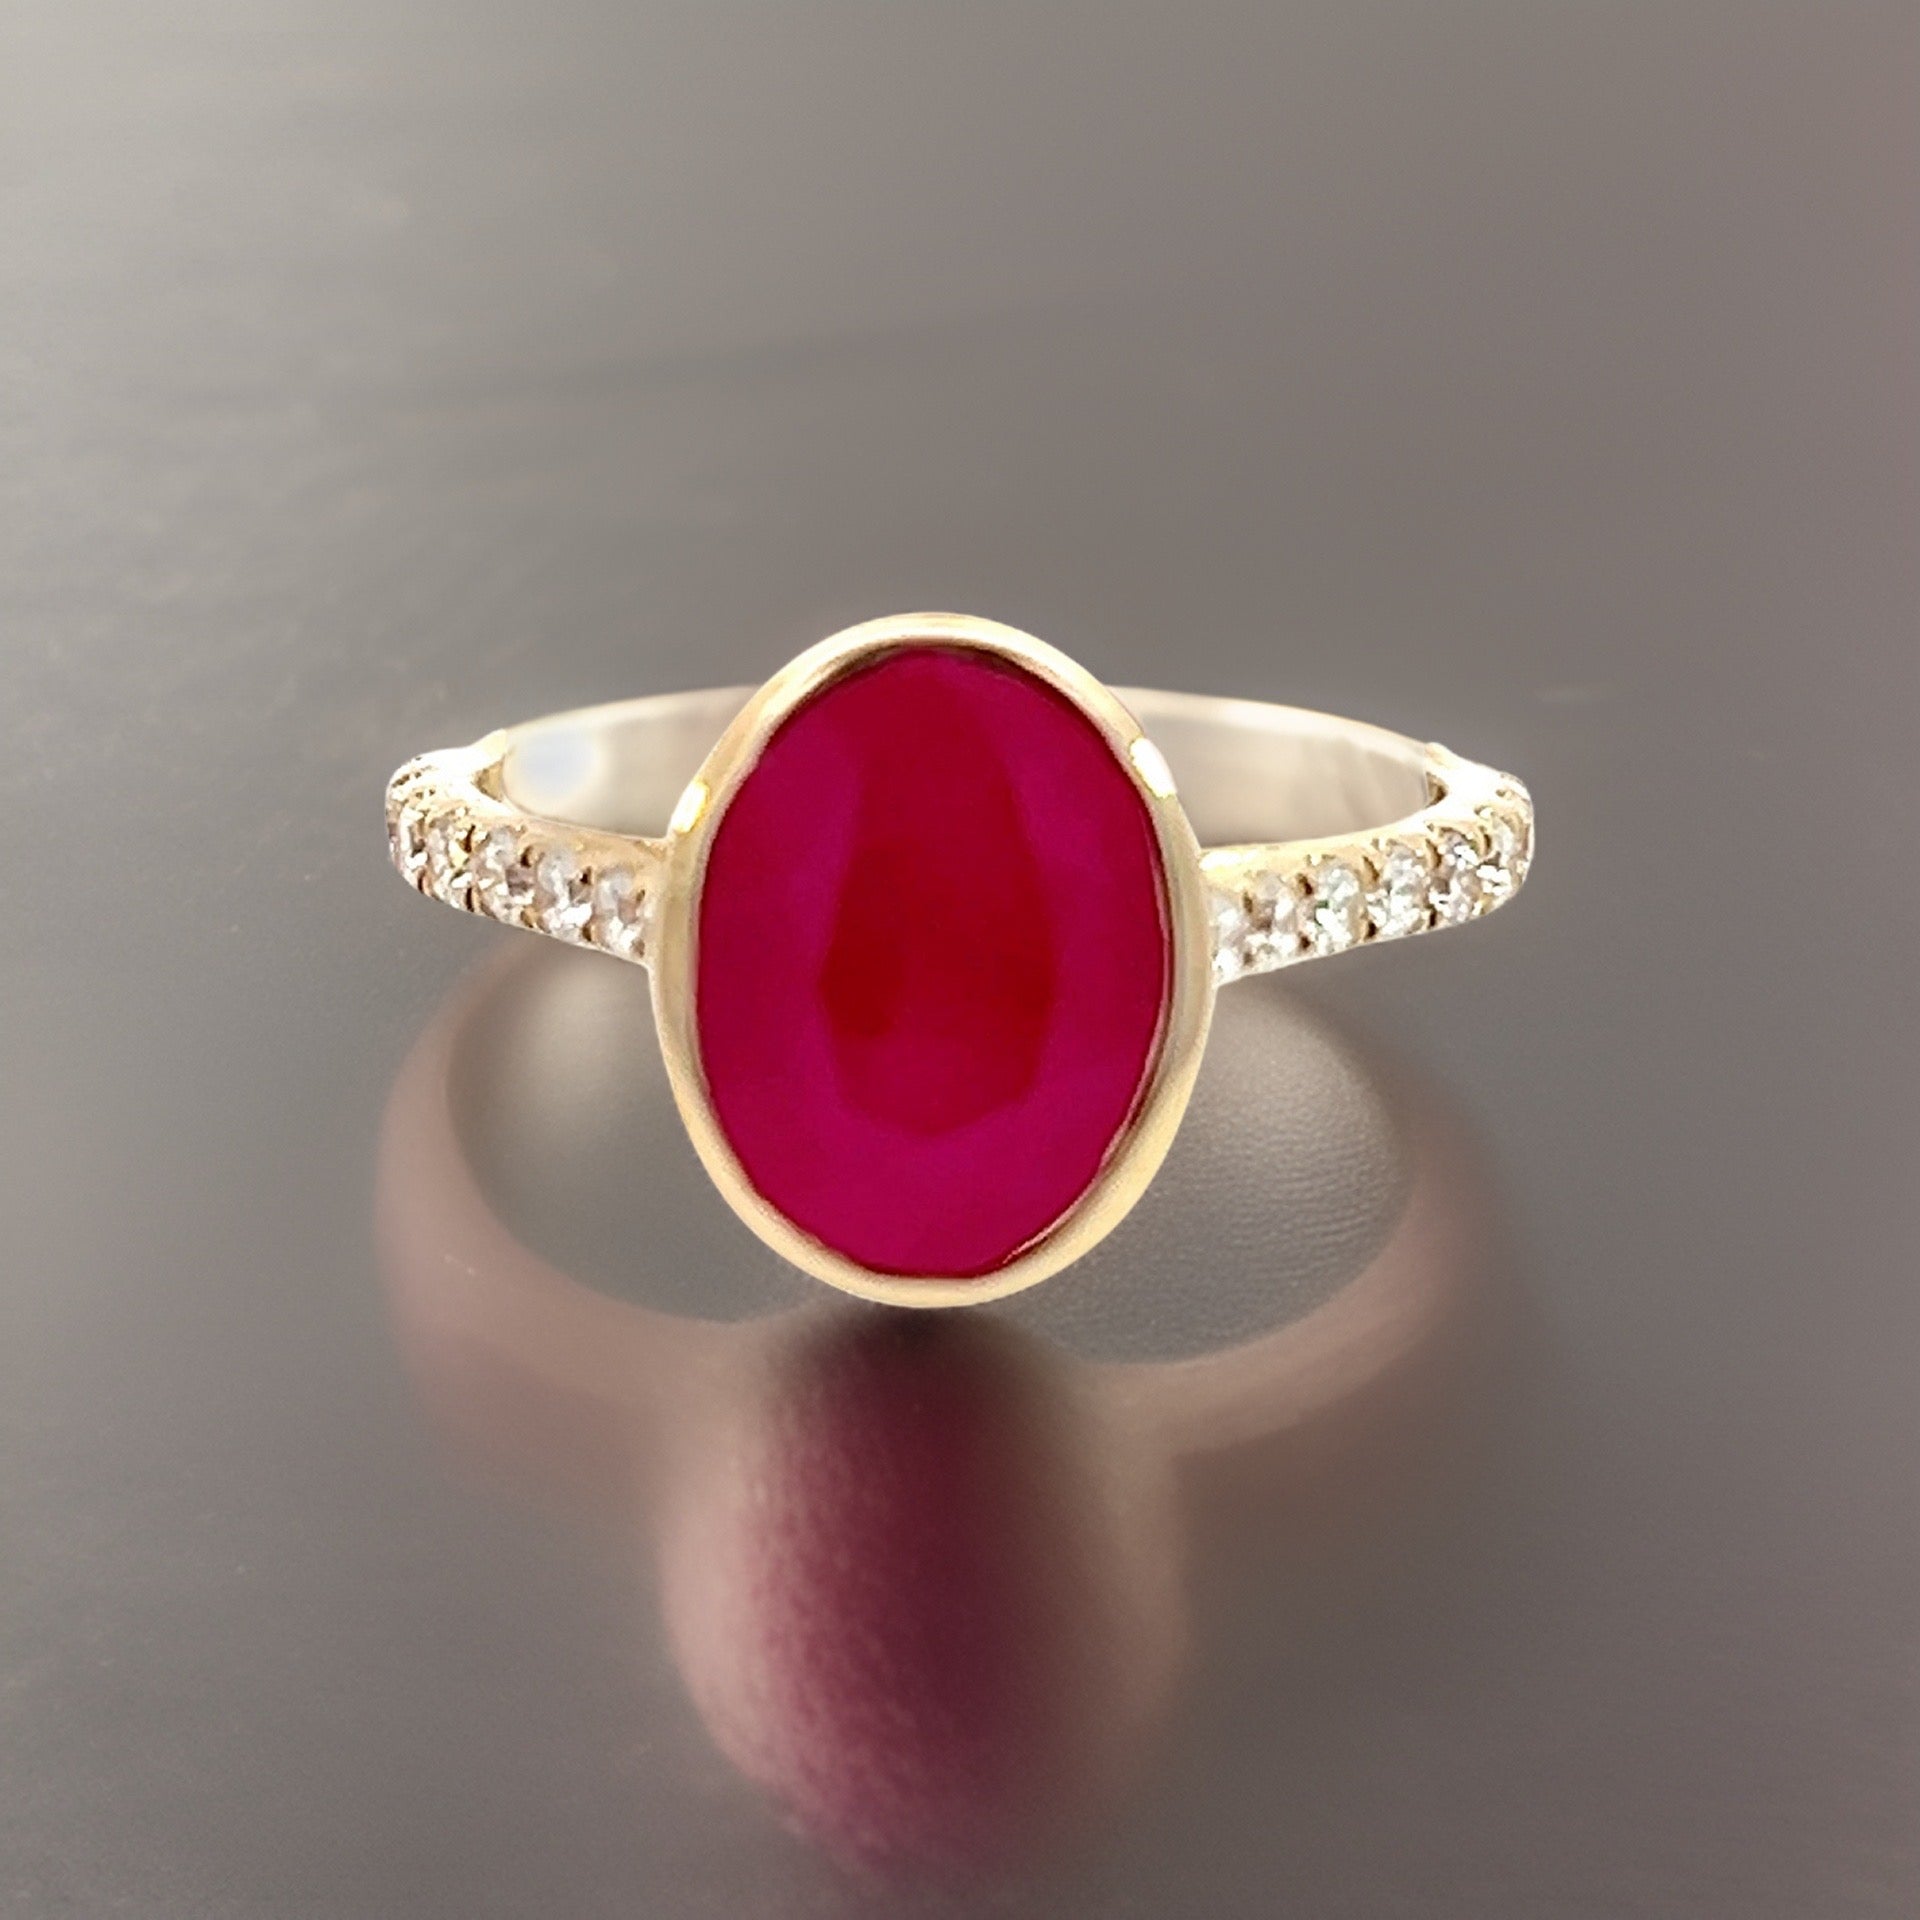 Natural Ruby Diamond Ring 6.75 14k Y Gold 4.38 TCW Certified $4,950 310583 - Certified Fine Jewelry